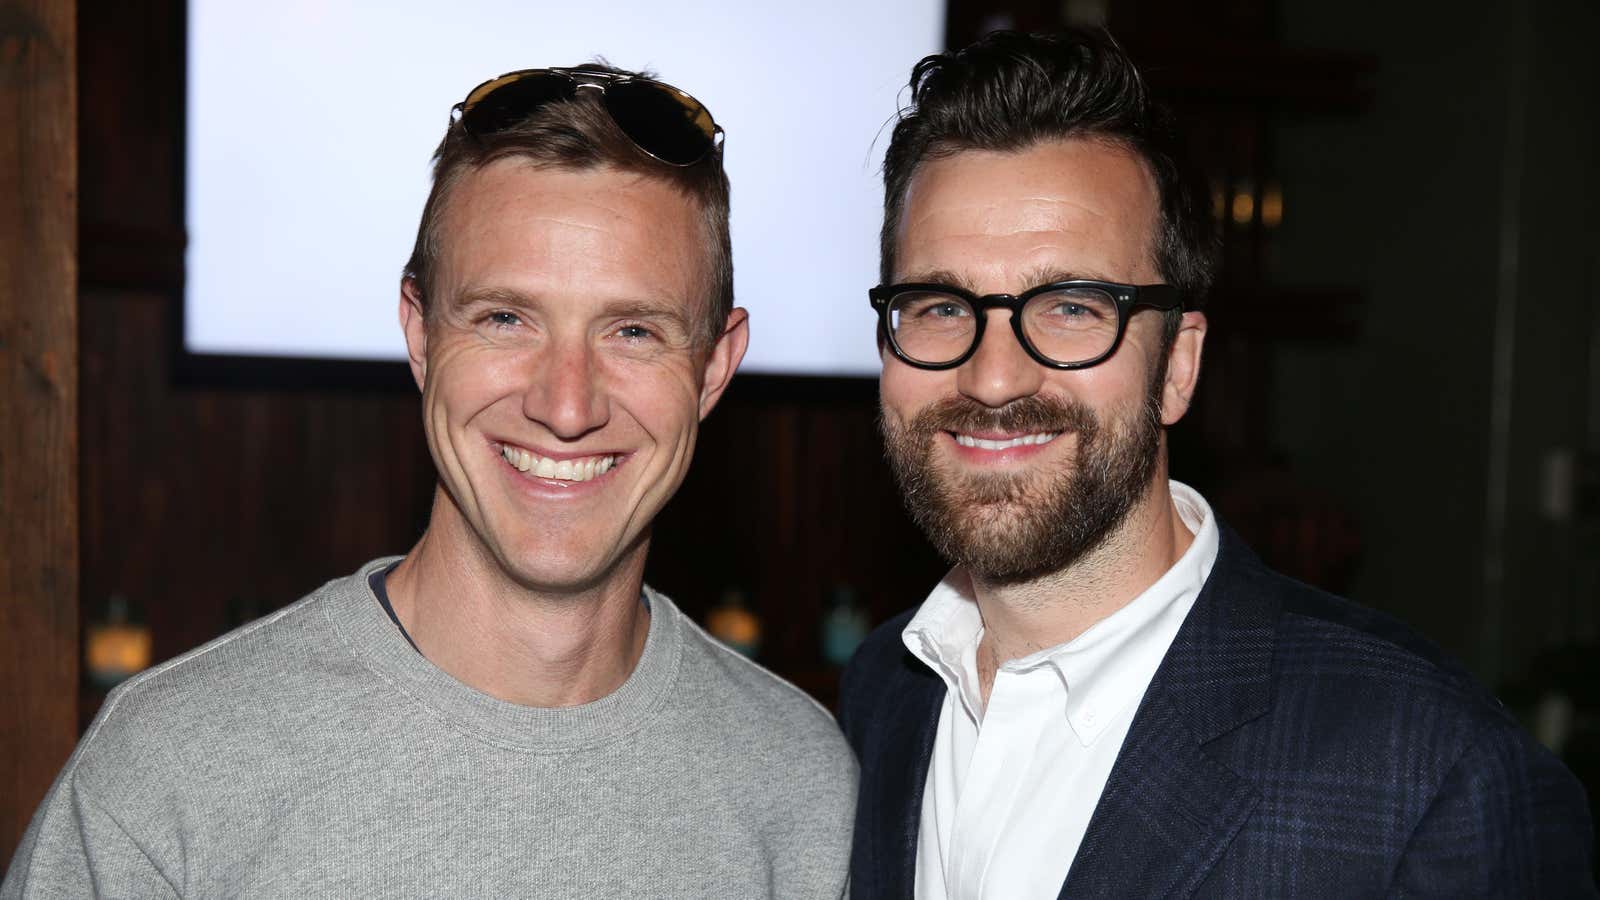 Ian Rogers, left, is no stranger to fashion. Here he is with the US editor of e-commerce site Mr. Porter in 2014.